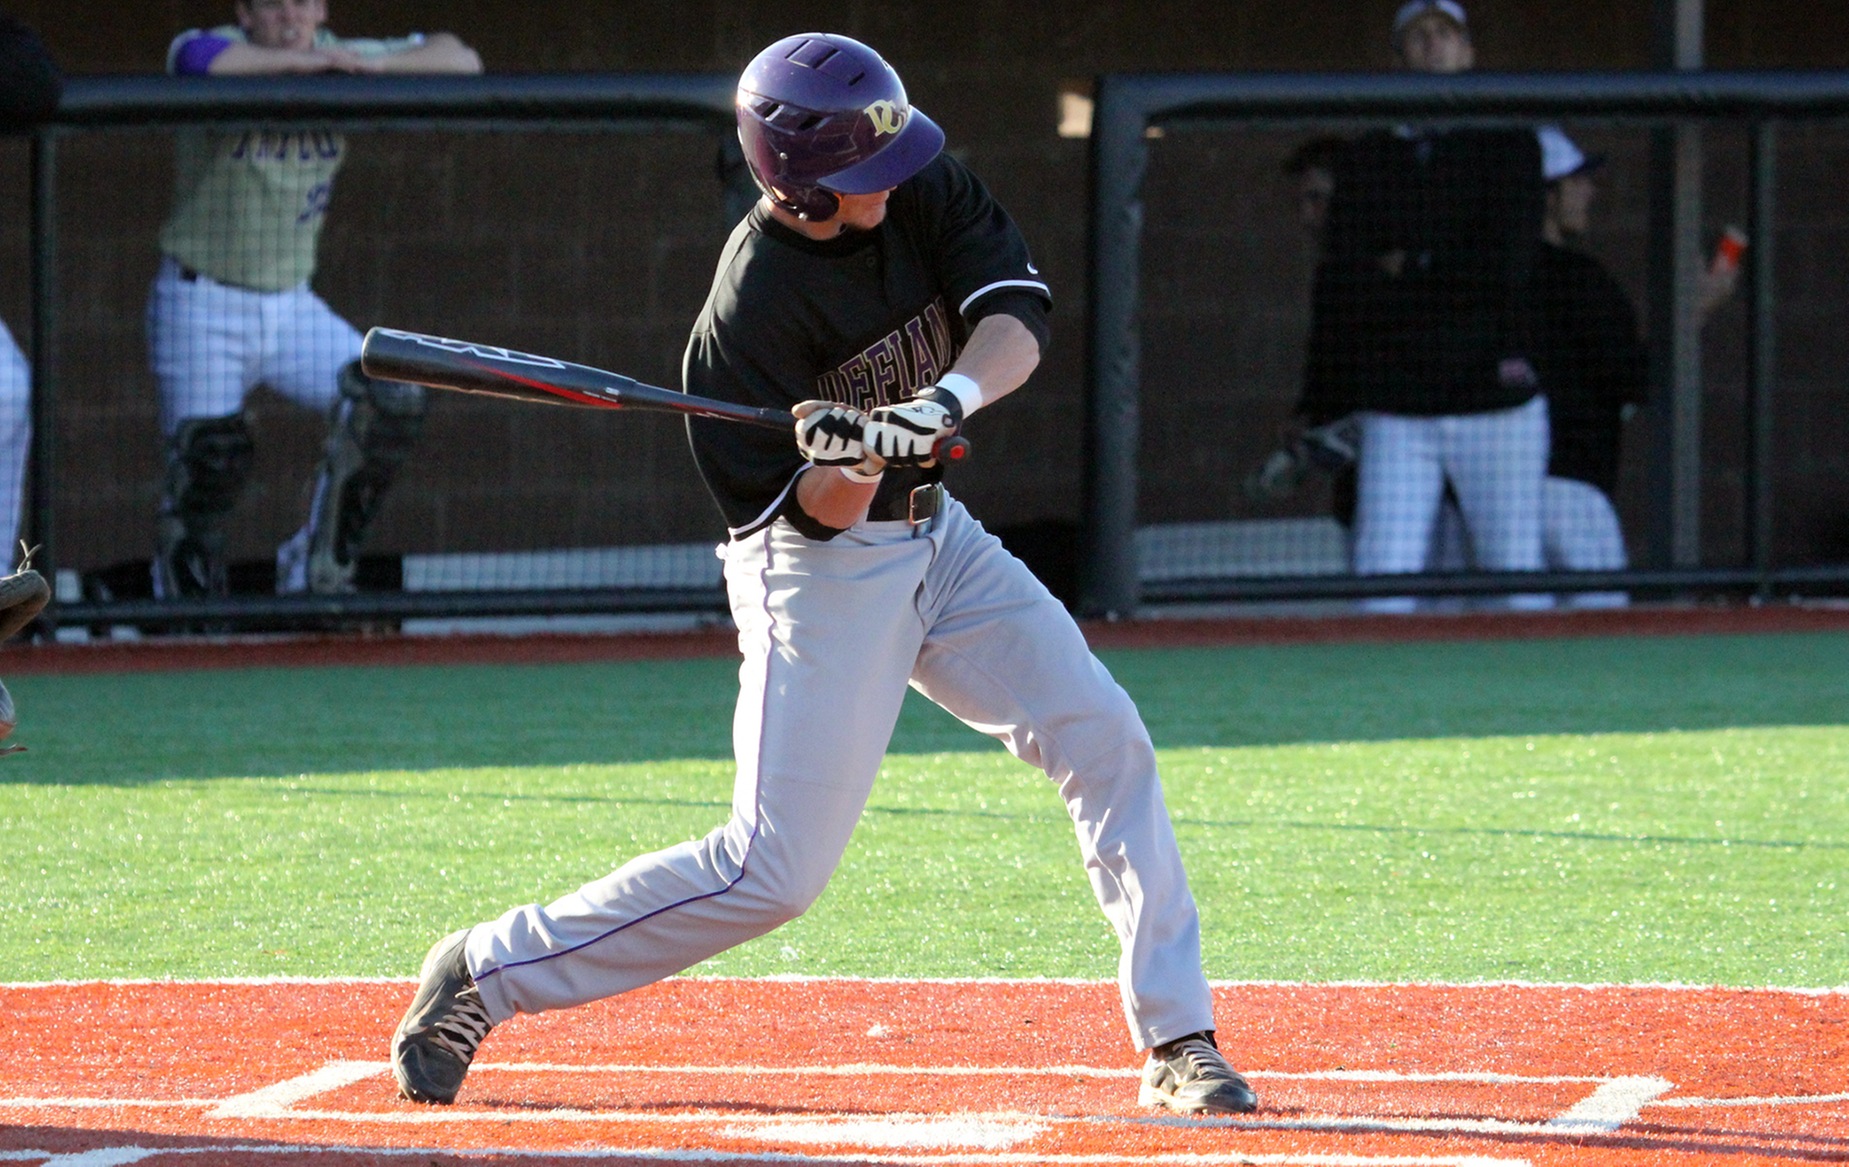 Defiance falls to Ohio Northern 5-4 in midweek clash